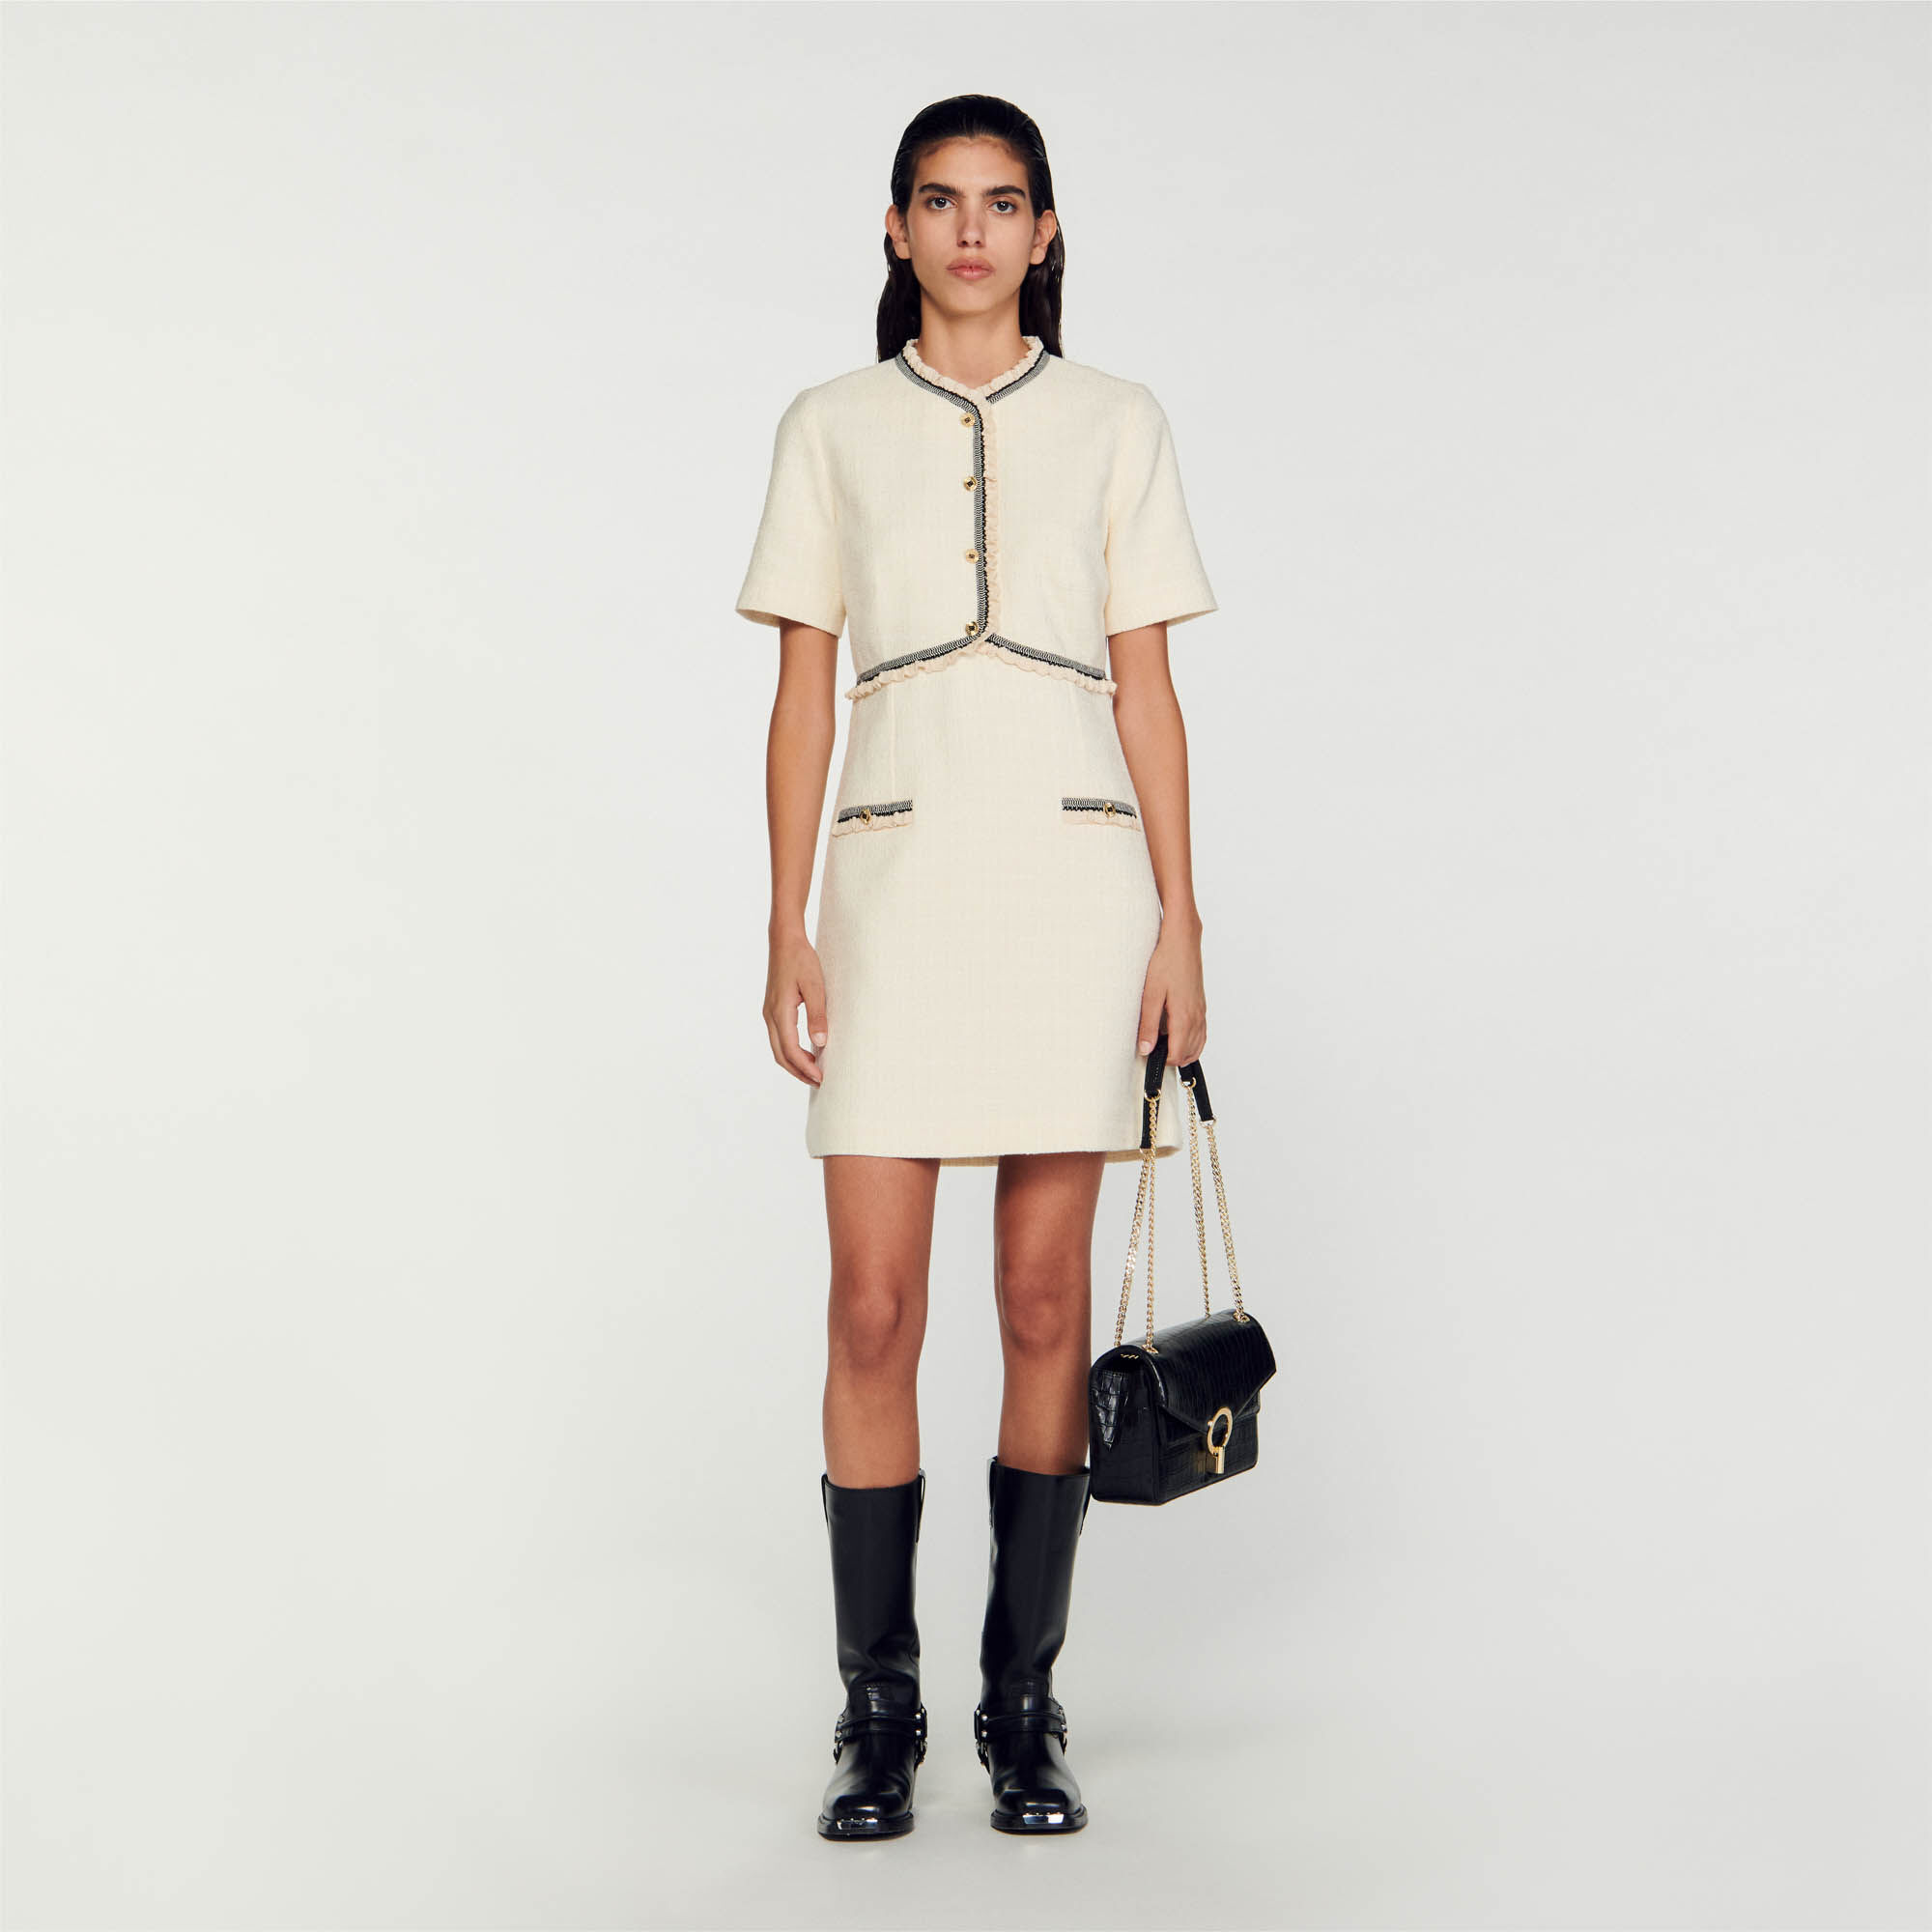 Women's dresses – For every occasion | SANDRO